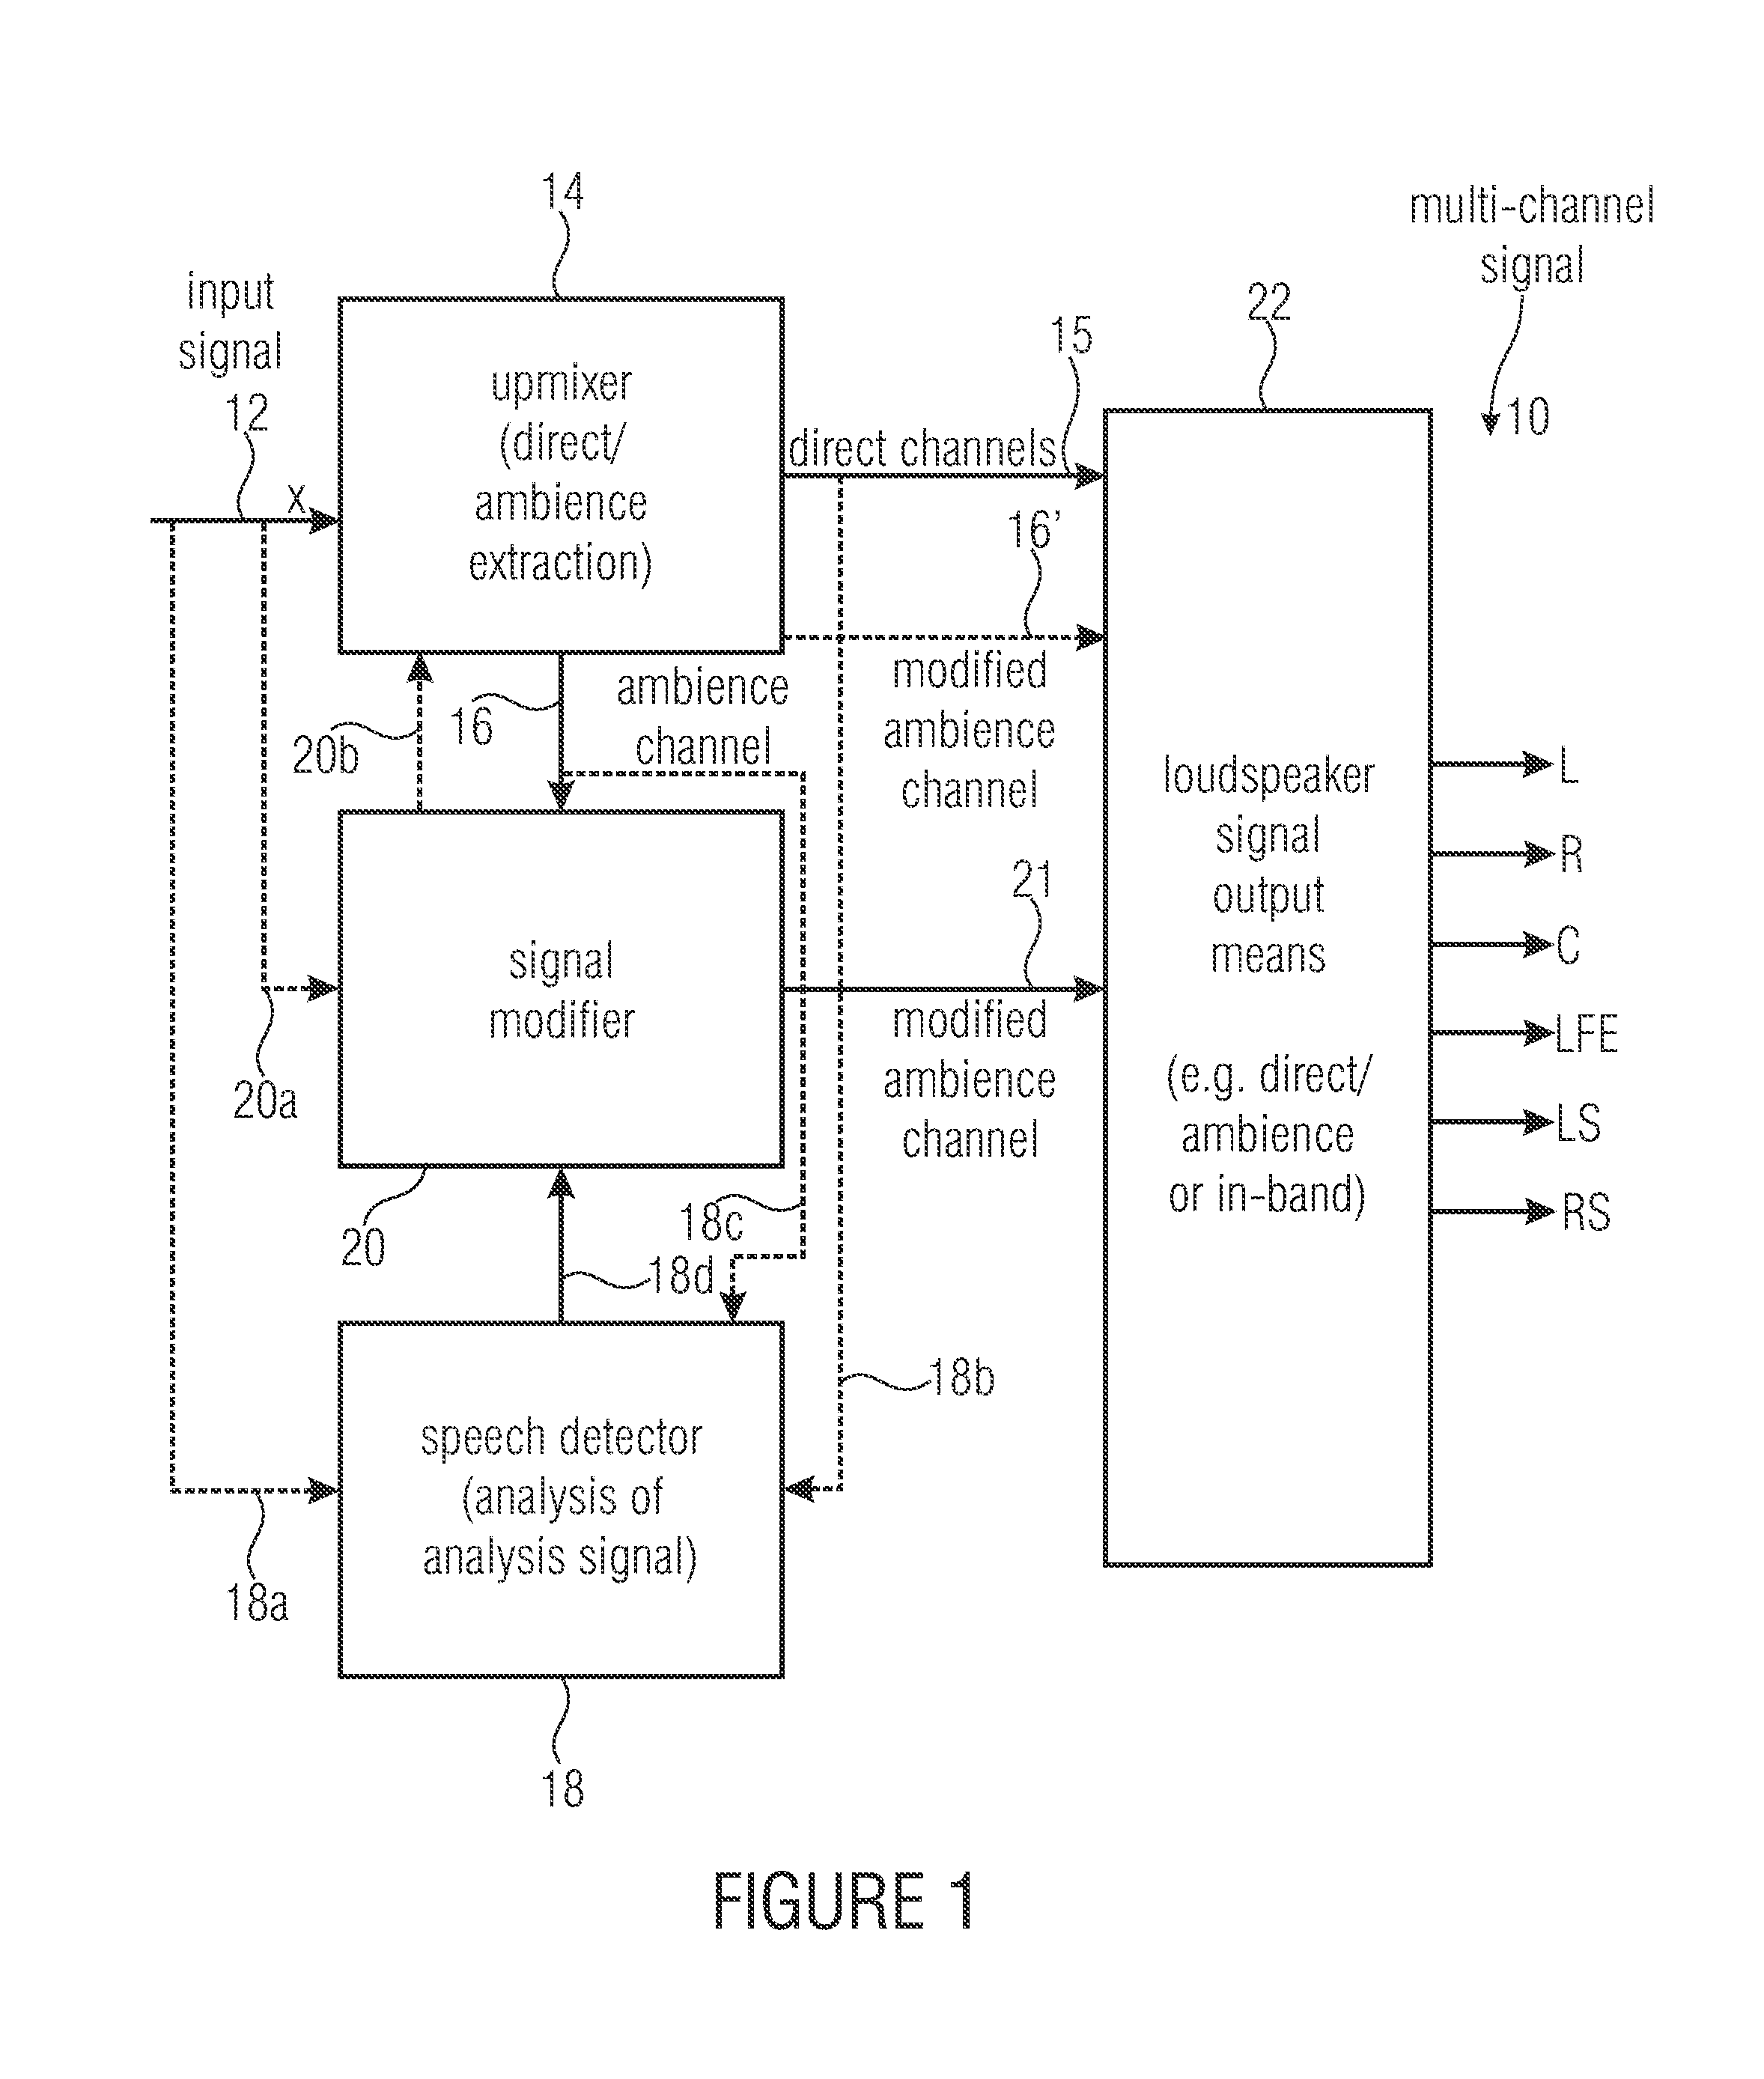 Device and method for generating a multi-channel signal including speech signal processing